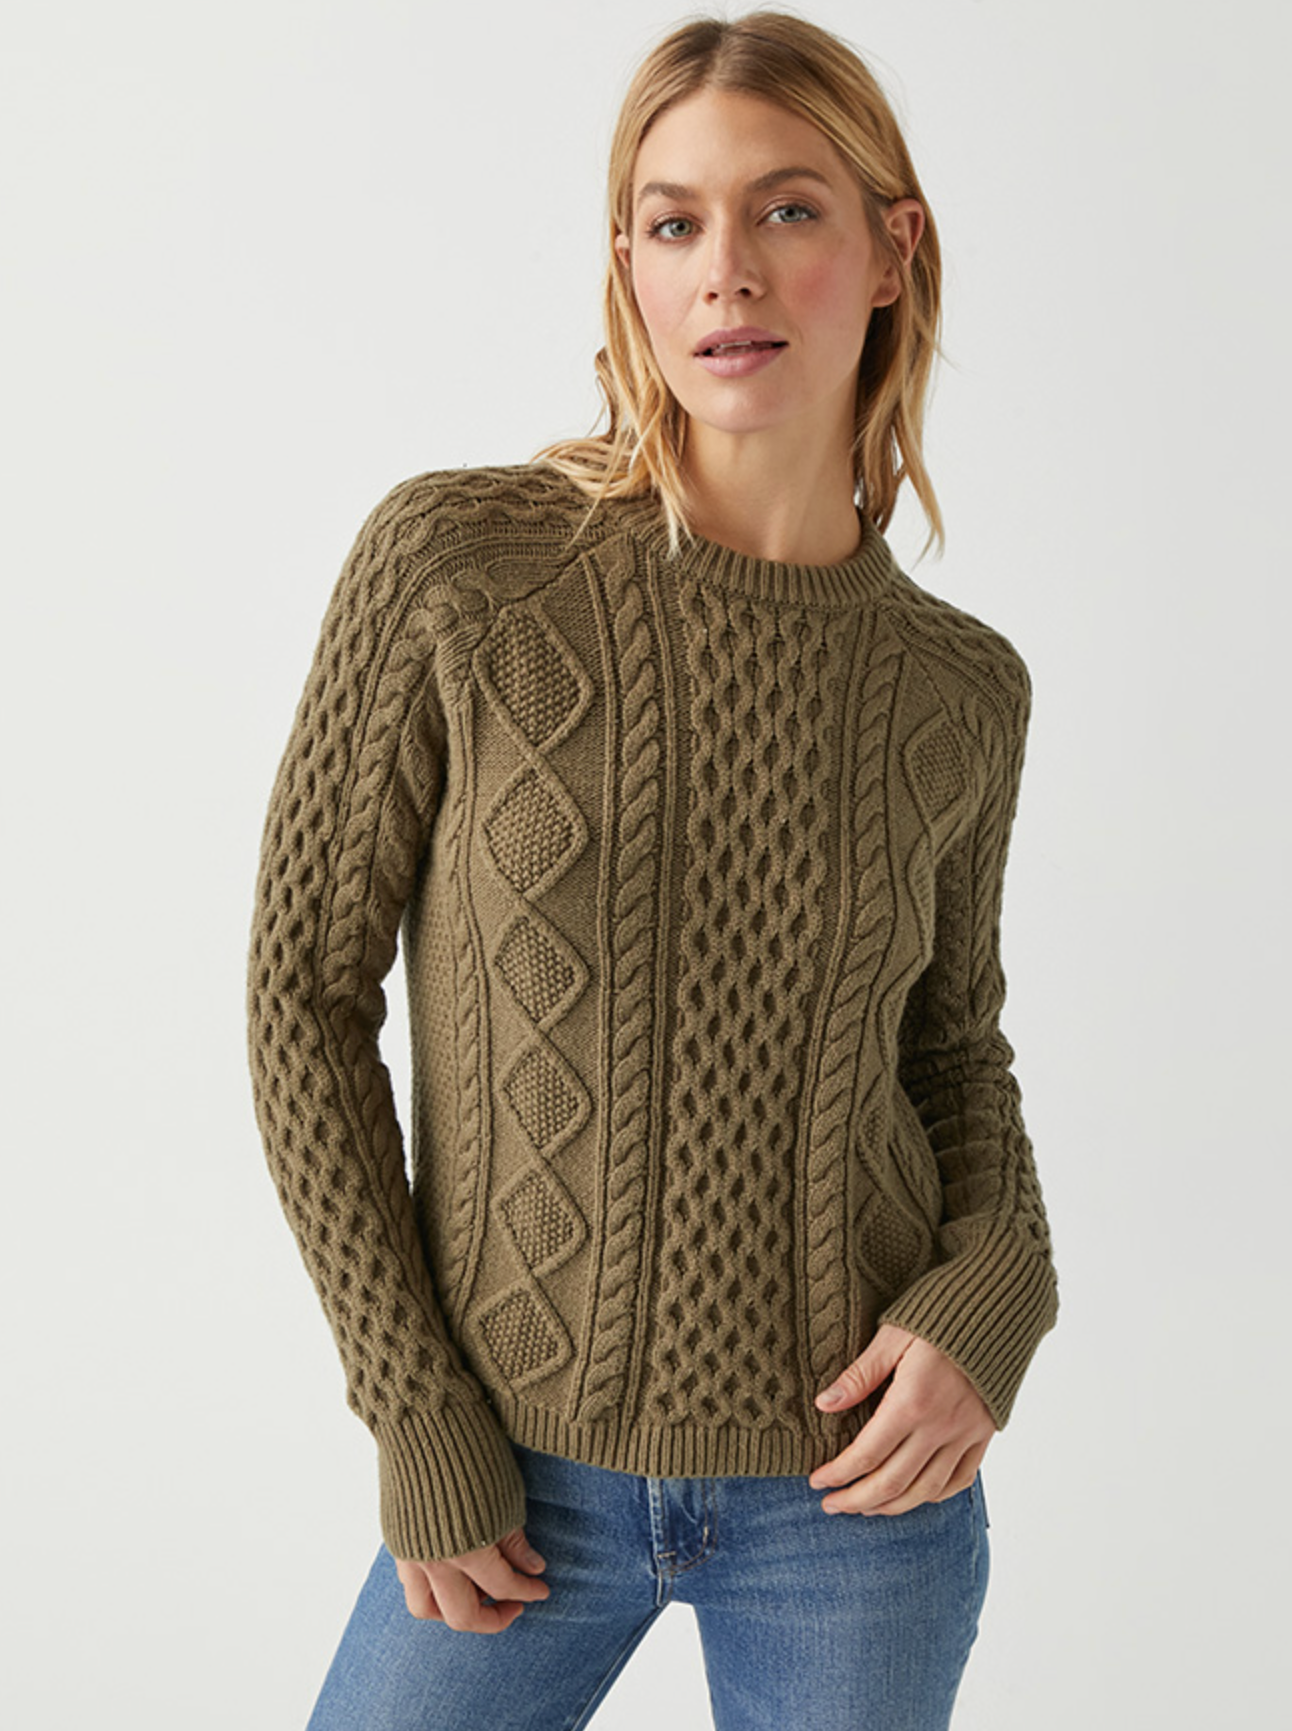 Adina Cable Knit Sweater | Dolma + Ivory-Sea Biscuit Del Mar